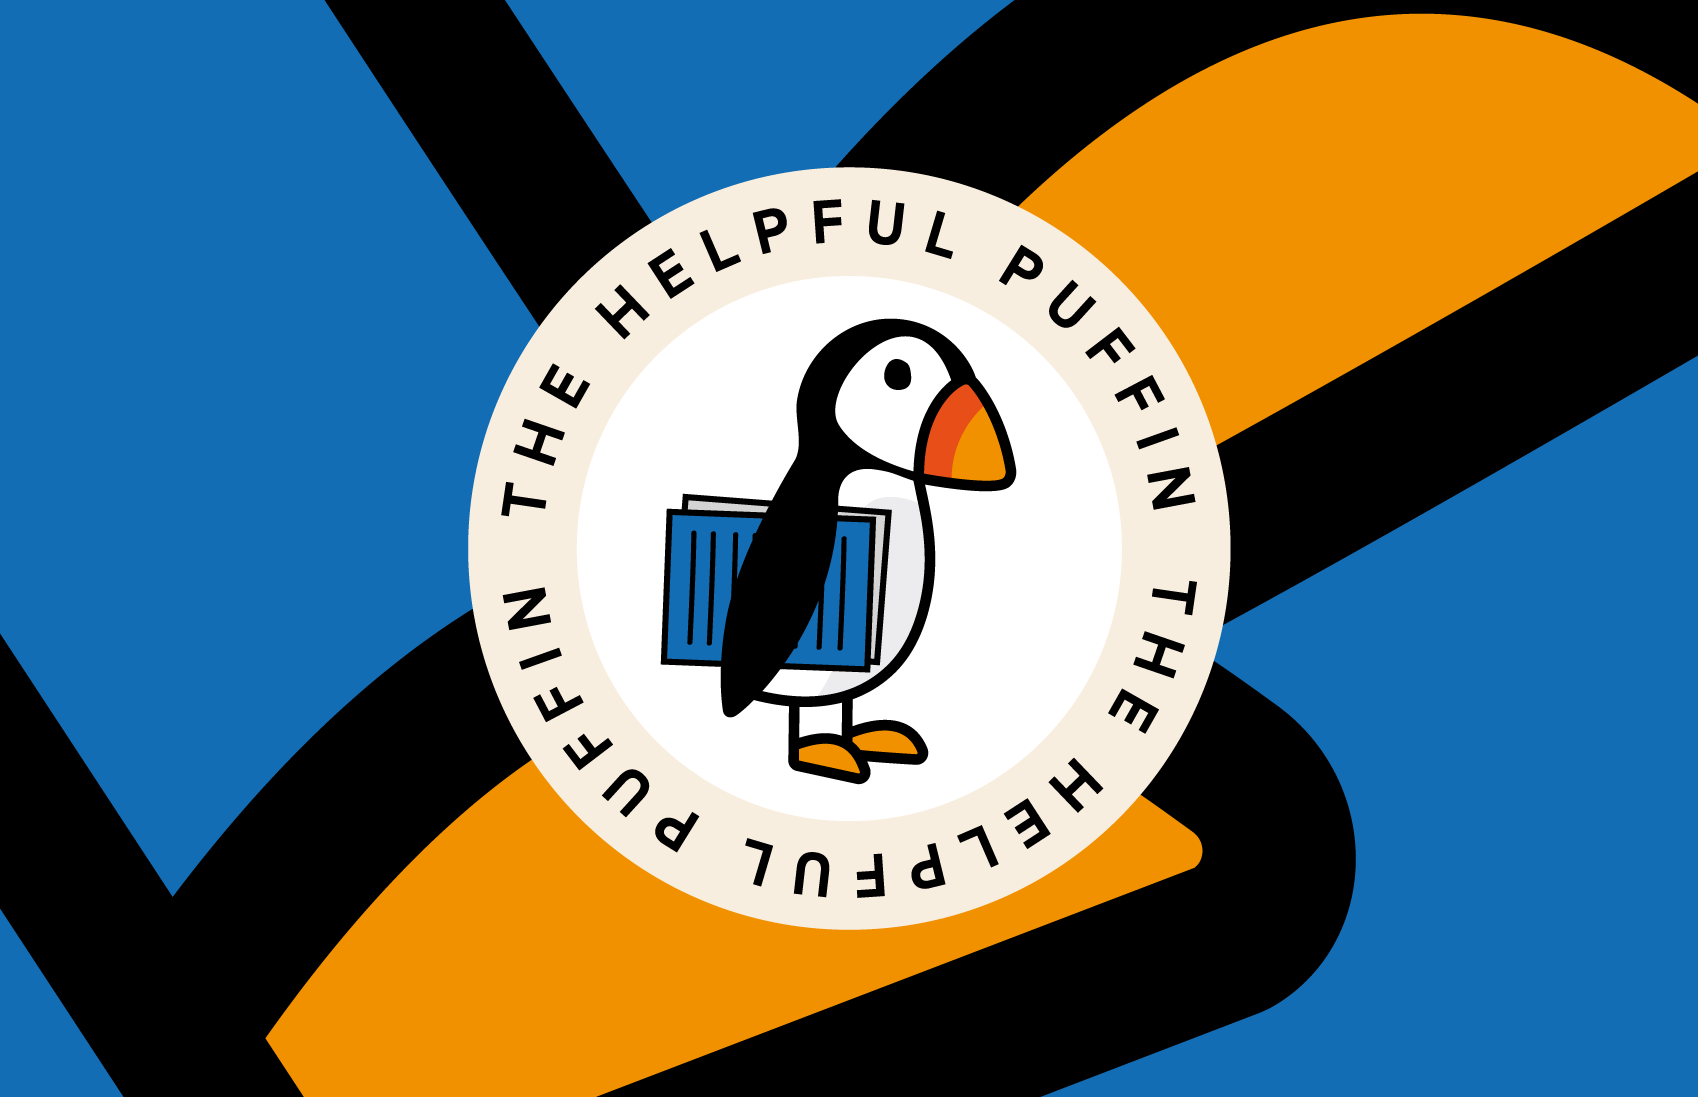 The Helpful Puffin